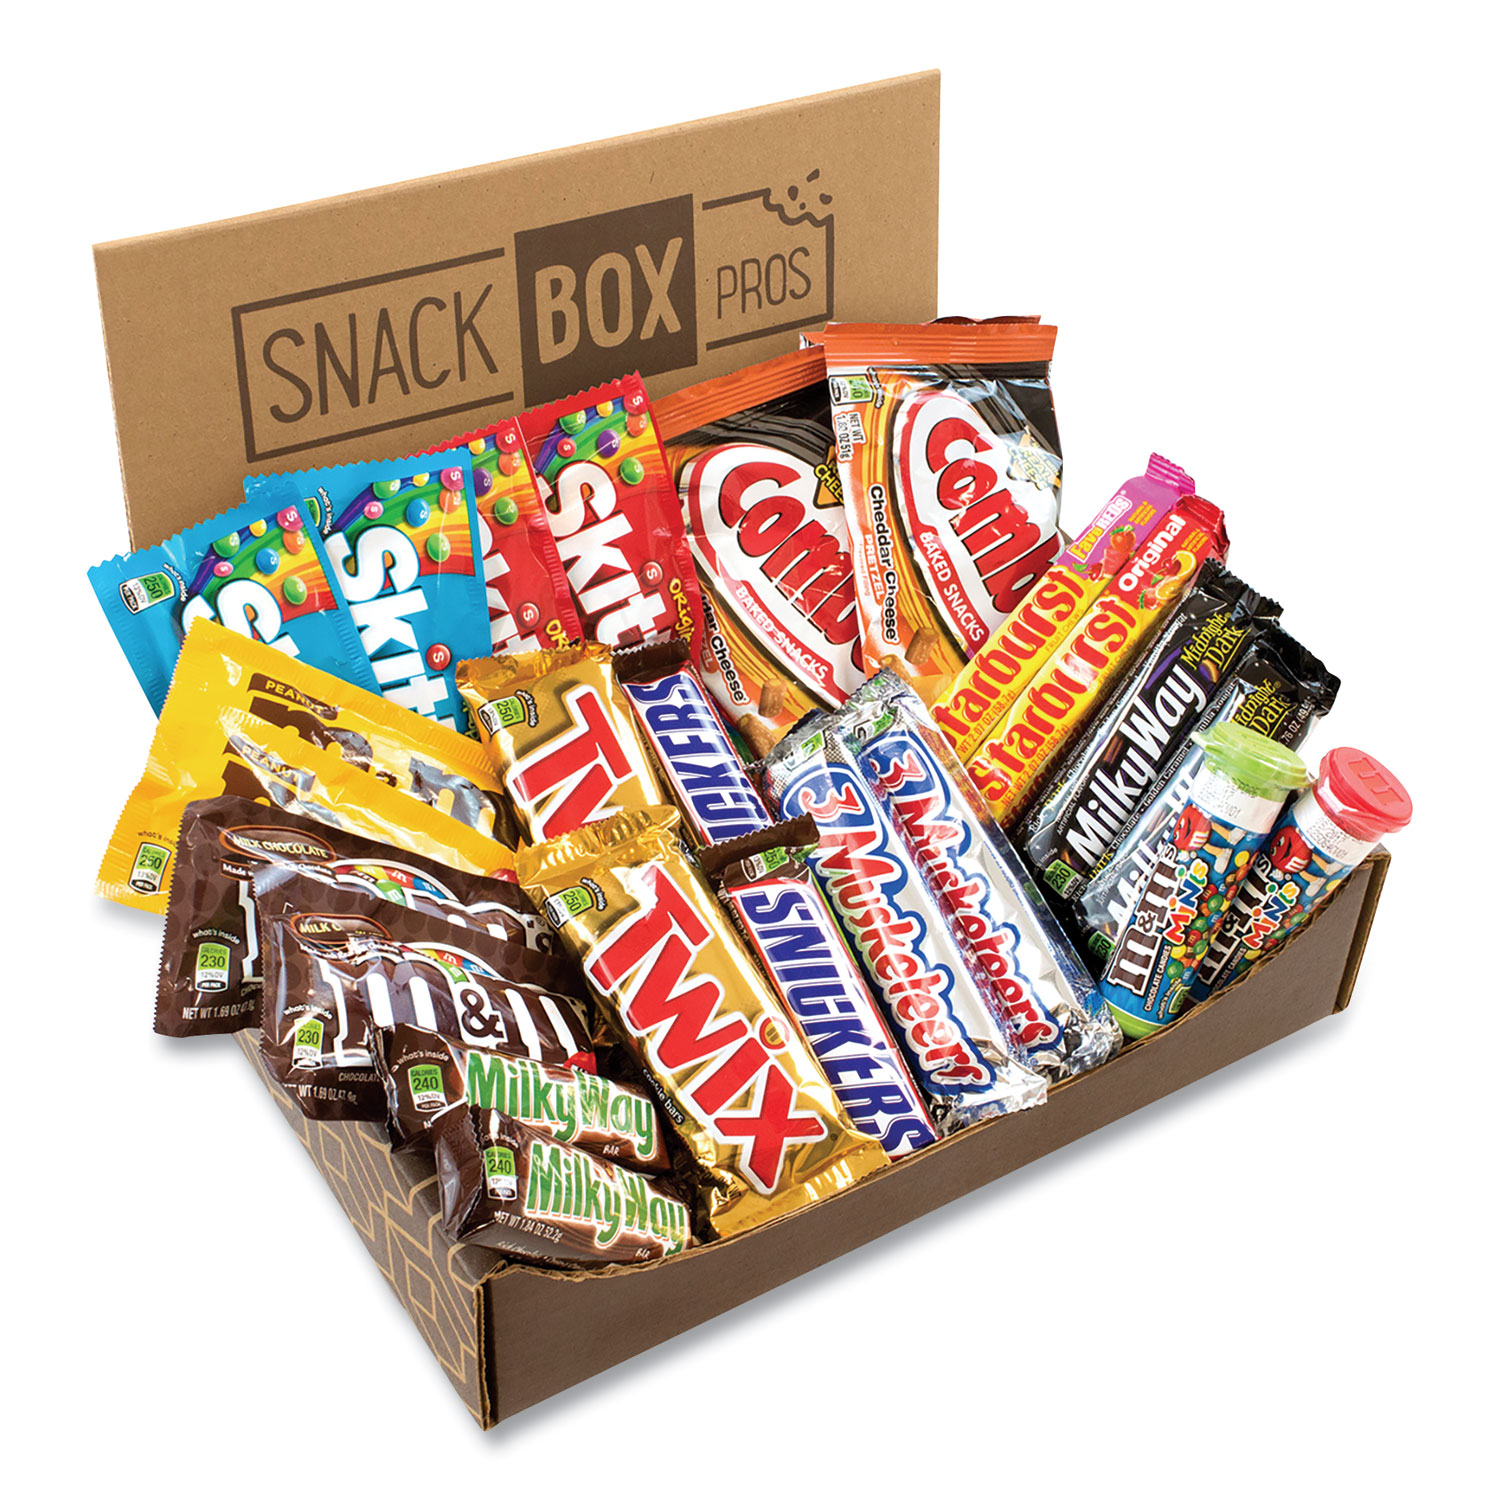  Snack Box Pros 70000017 MARS Favorites Snack Box, 25 Assorted Snacks, Free Delivery in 1-4 Business Days (GRR70000017) 